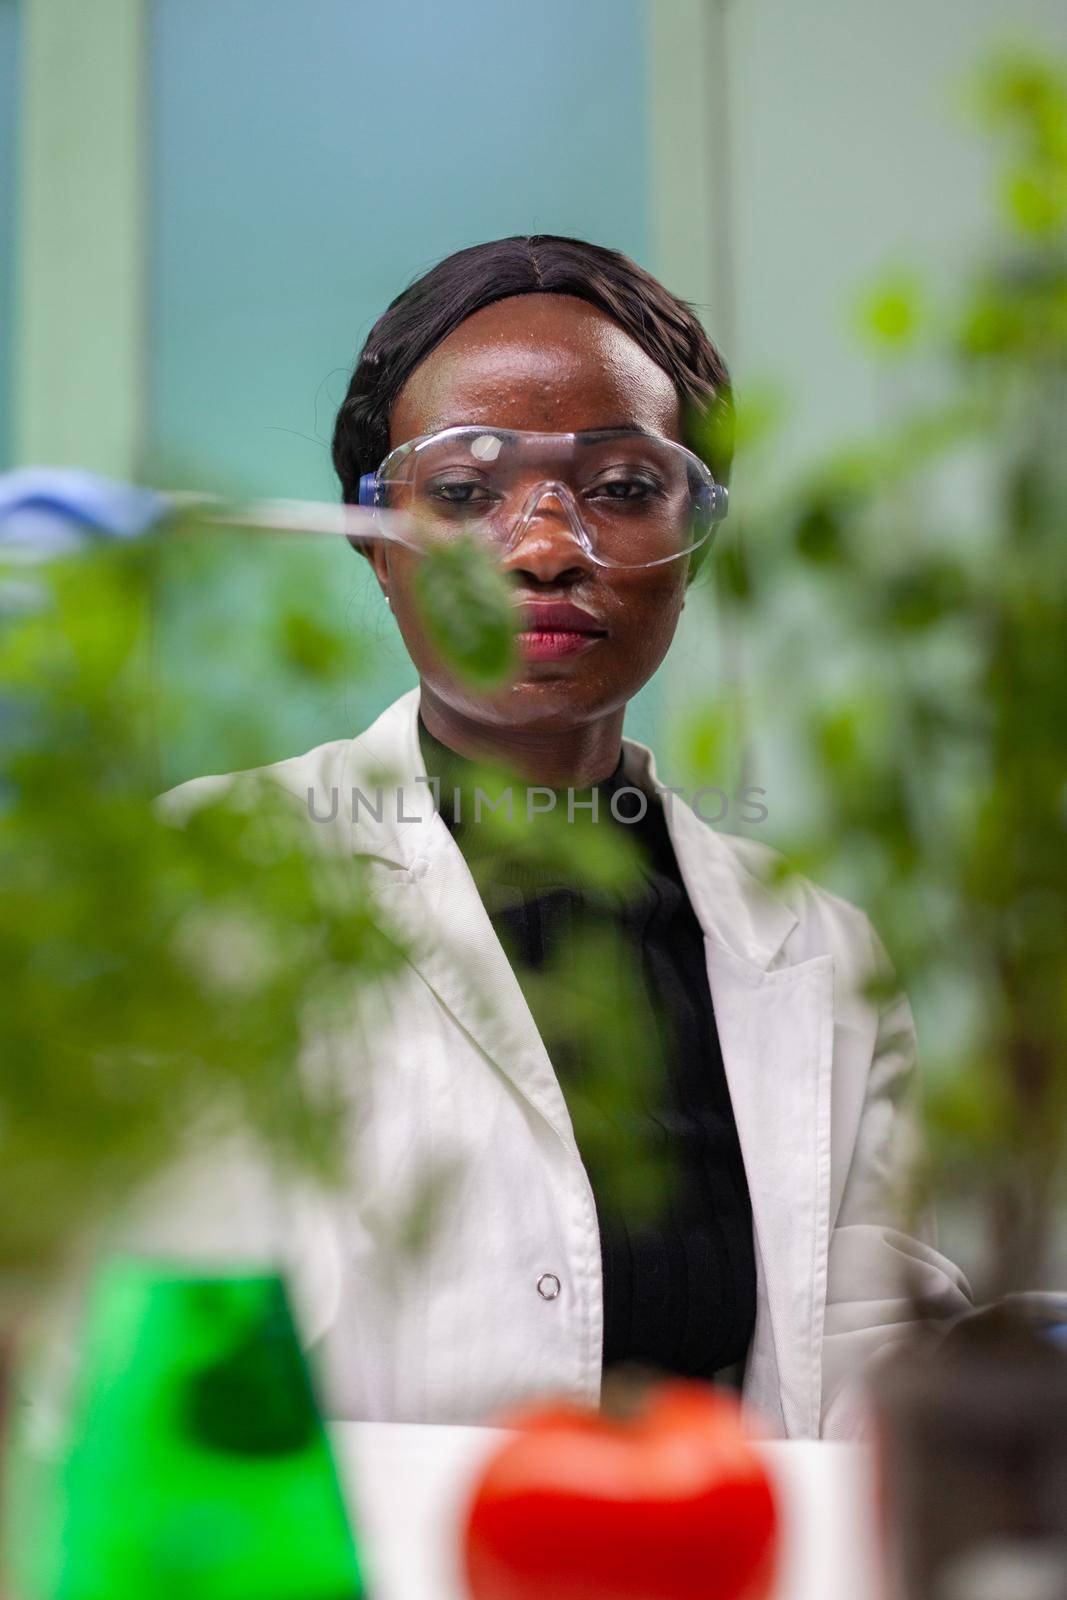 African researcher taking green leaf sample from petri dish putting under microscope observing genetic mutation on plants. Scientist botanist working in biochemistry lab analyzing organic agriculture.